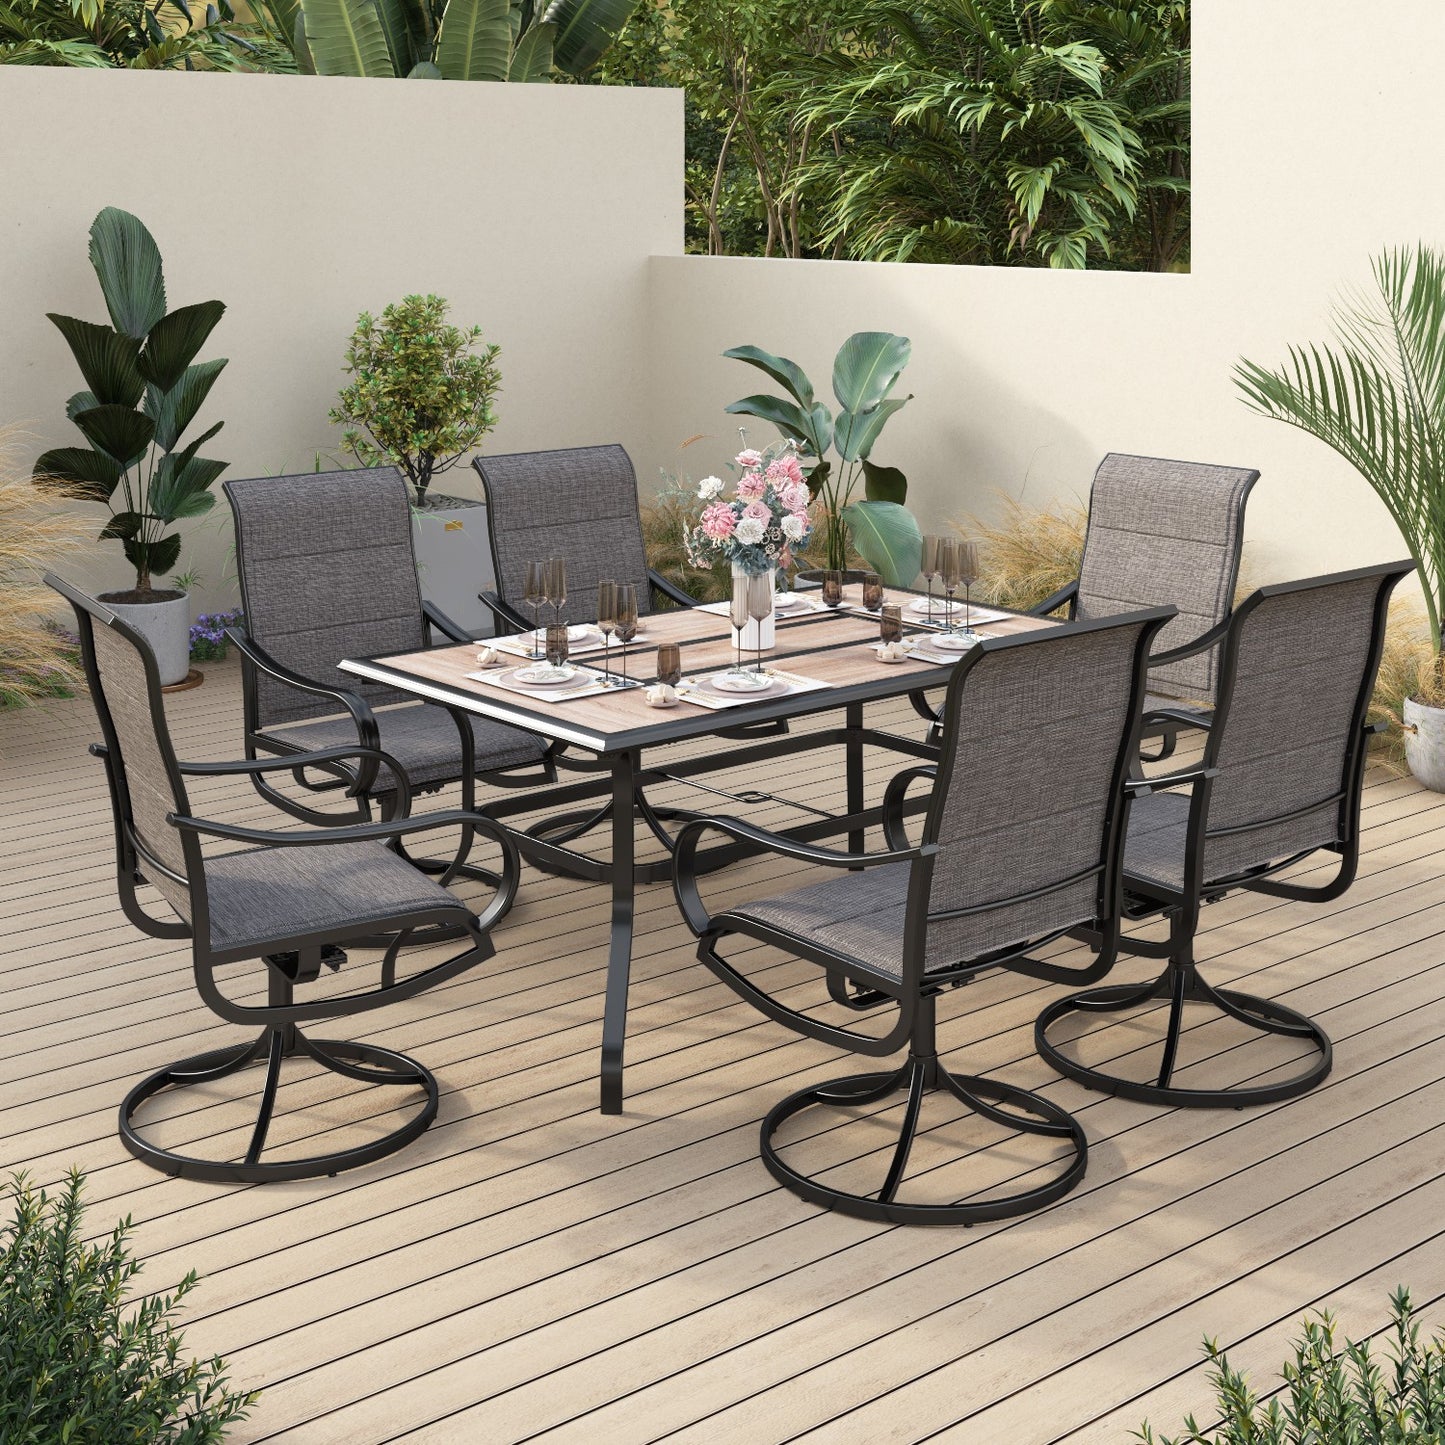 Sophia & William 7 Pieces Metal Patio Dining Set Swivel Paded Chairs and Table Set